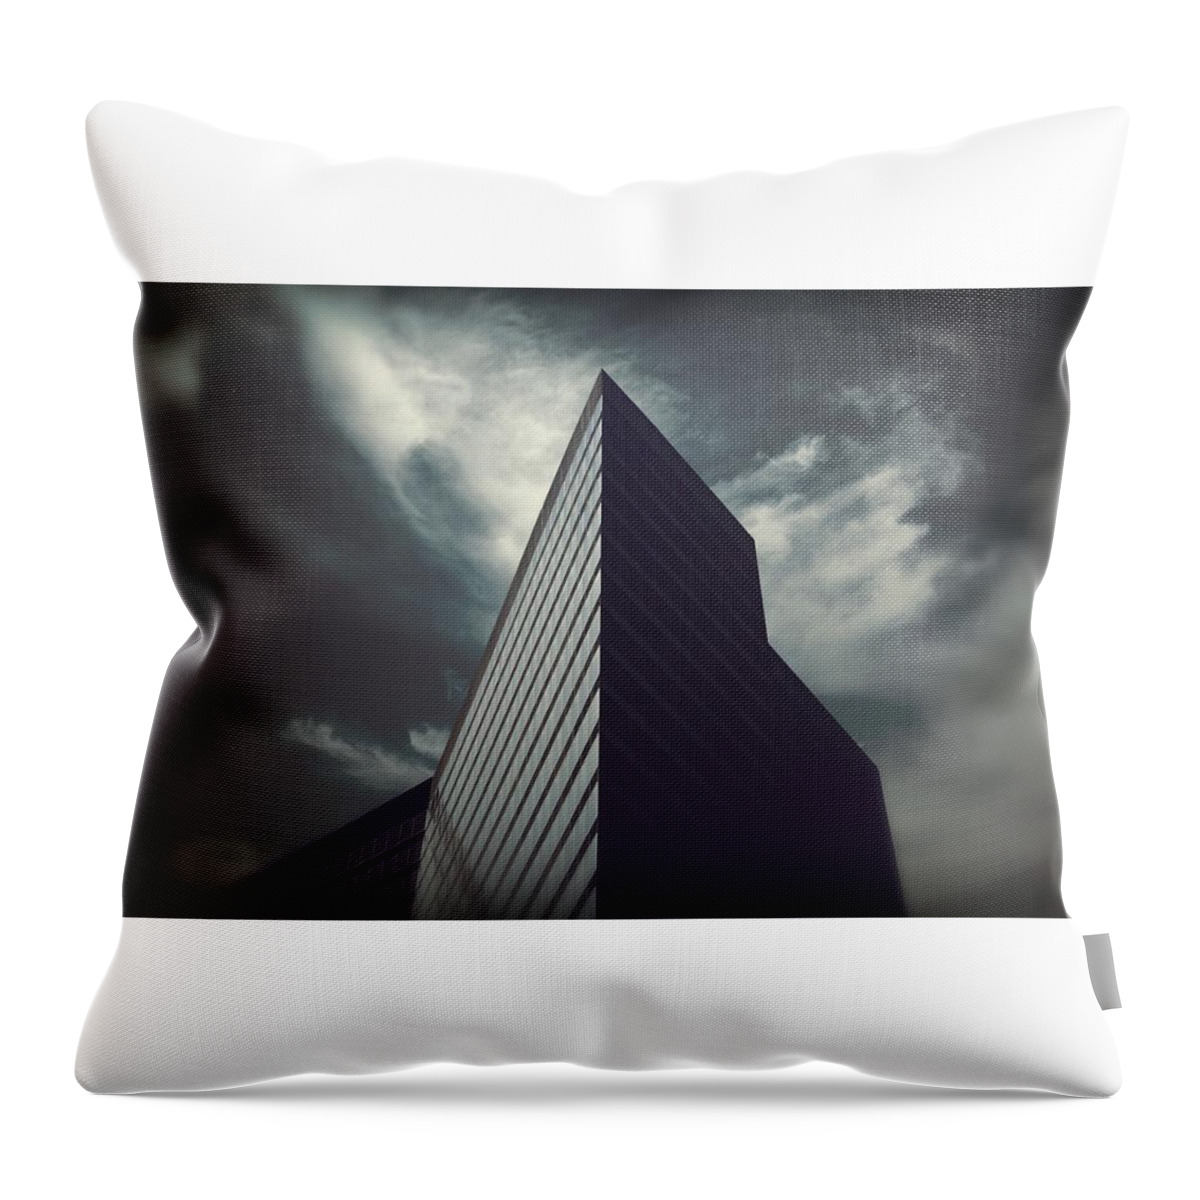 Building Throw Pillow featuring the digital art Building #24 by Super Lovely